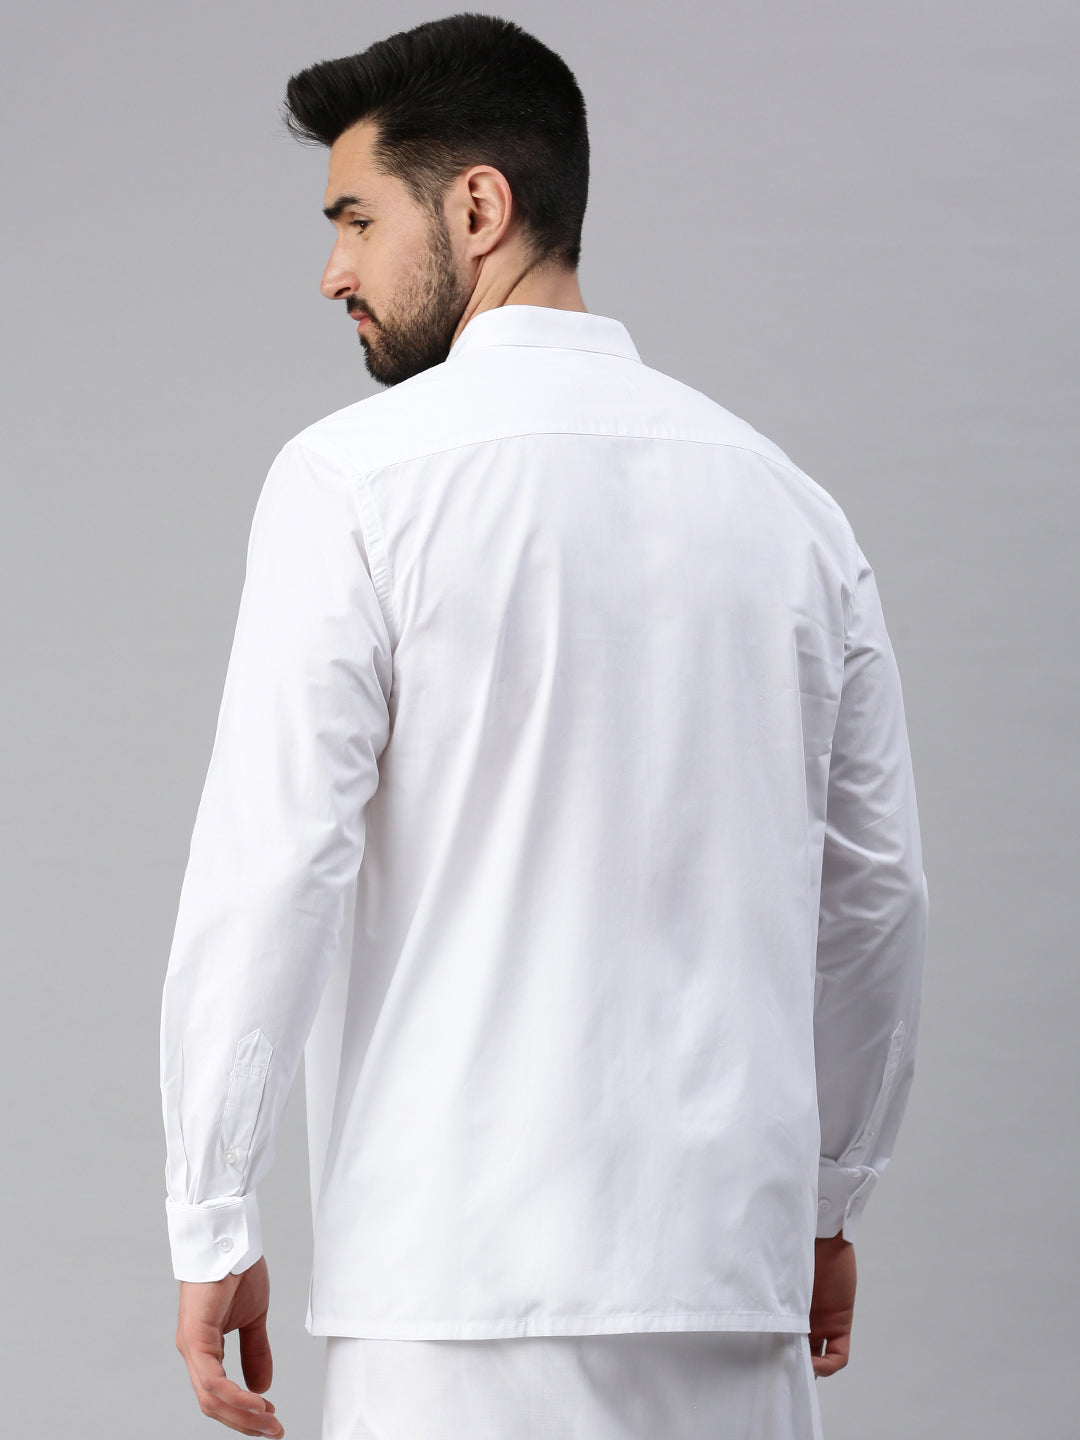 Mens 100% Cotton White Shirt Full Sleeves Plus Size Chinese Collar-Back view